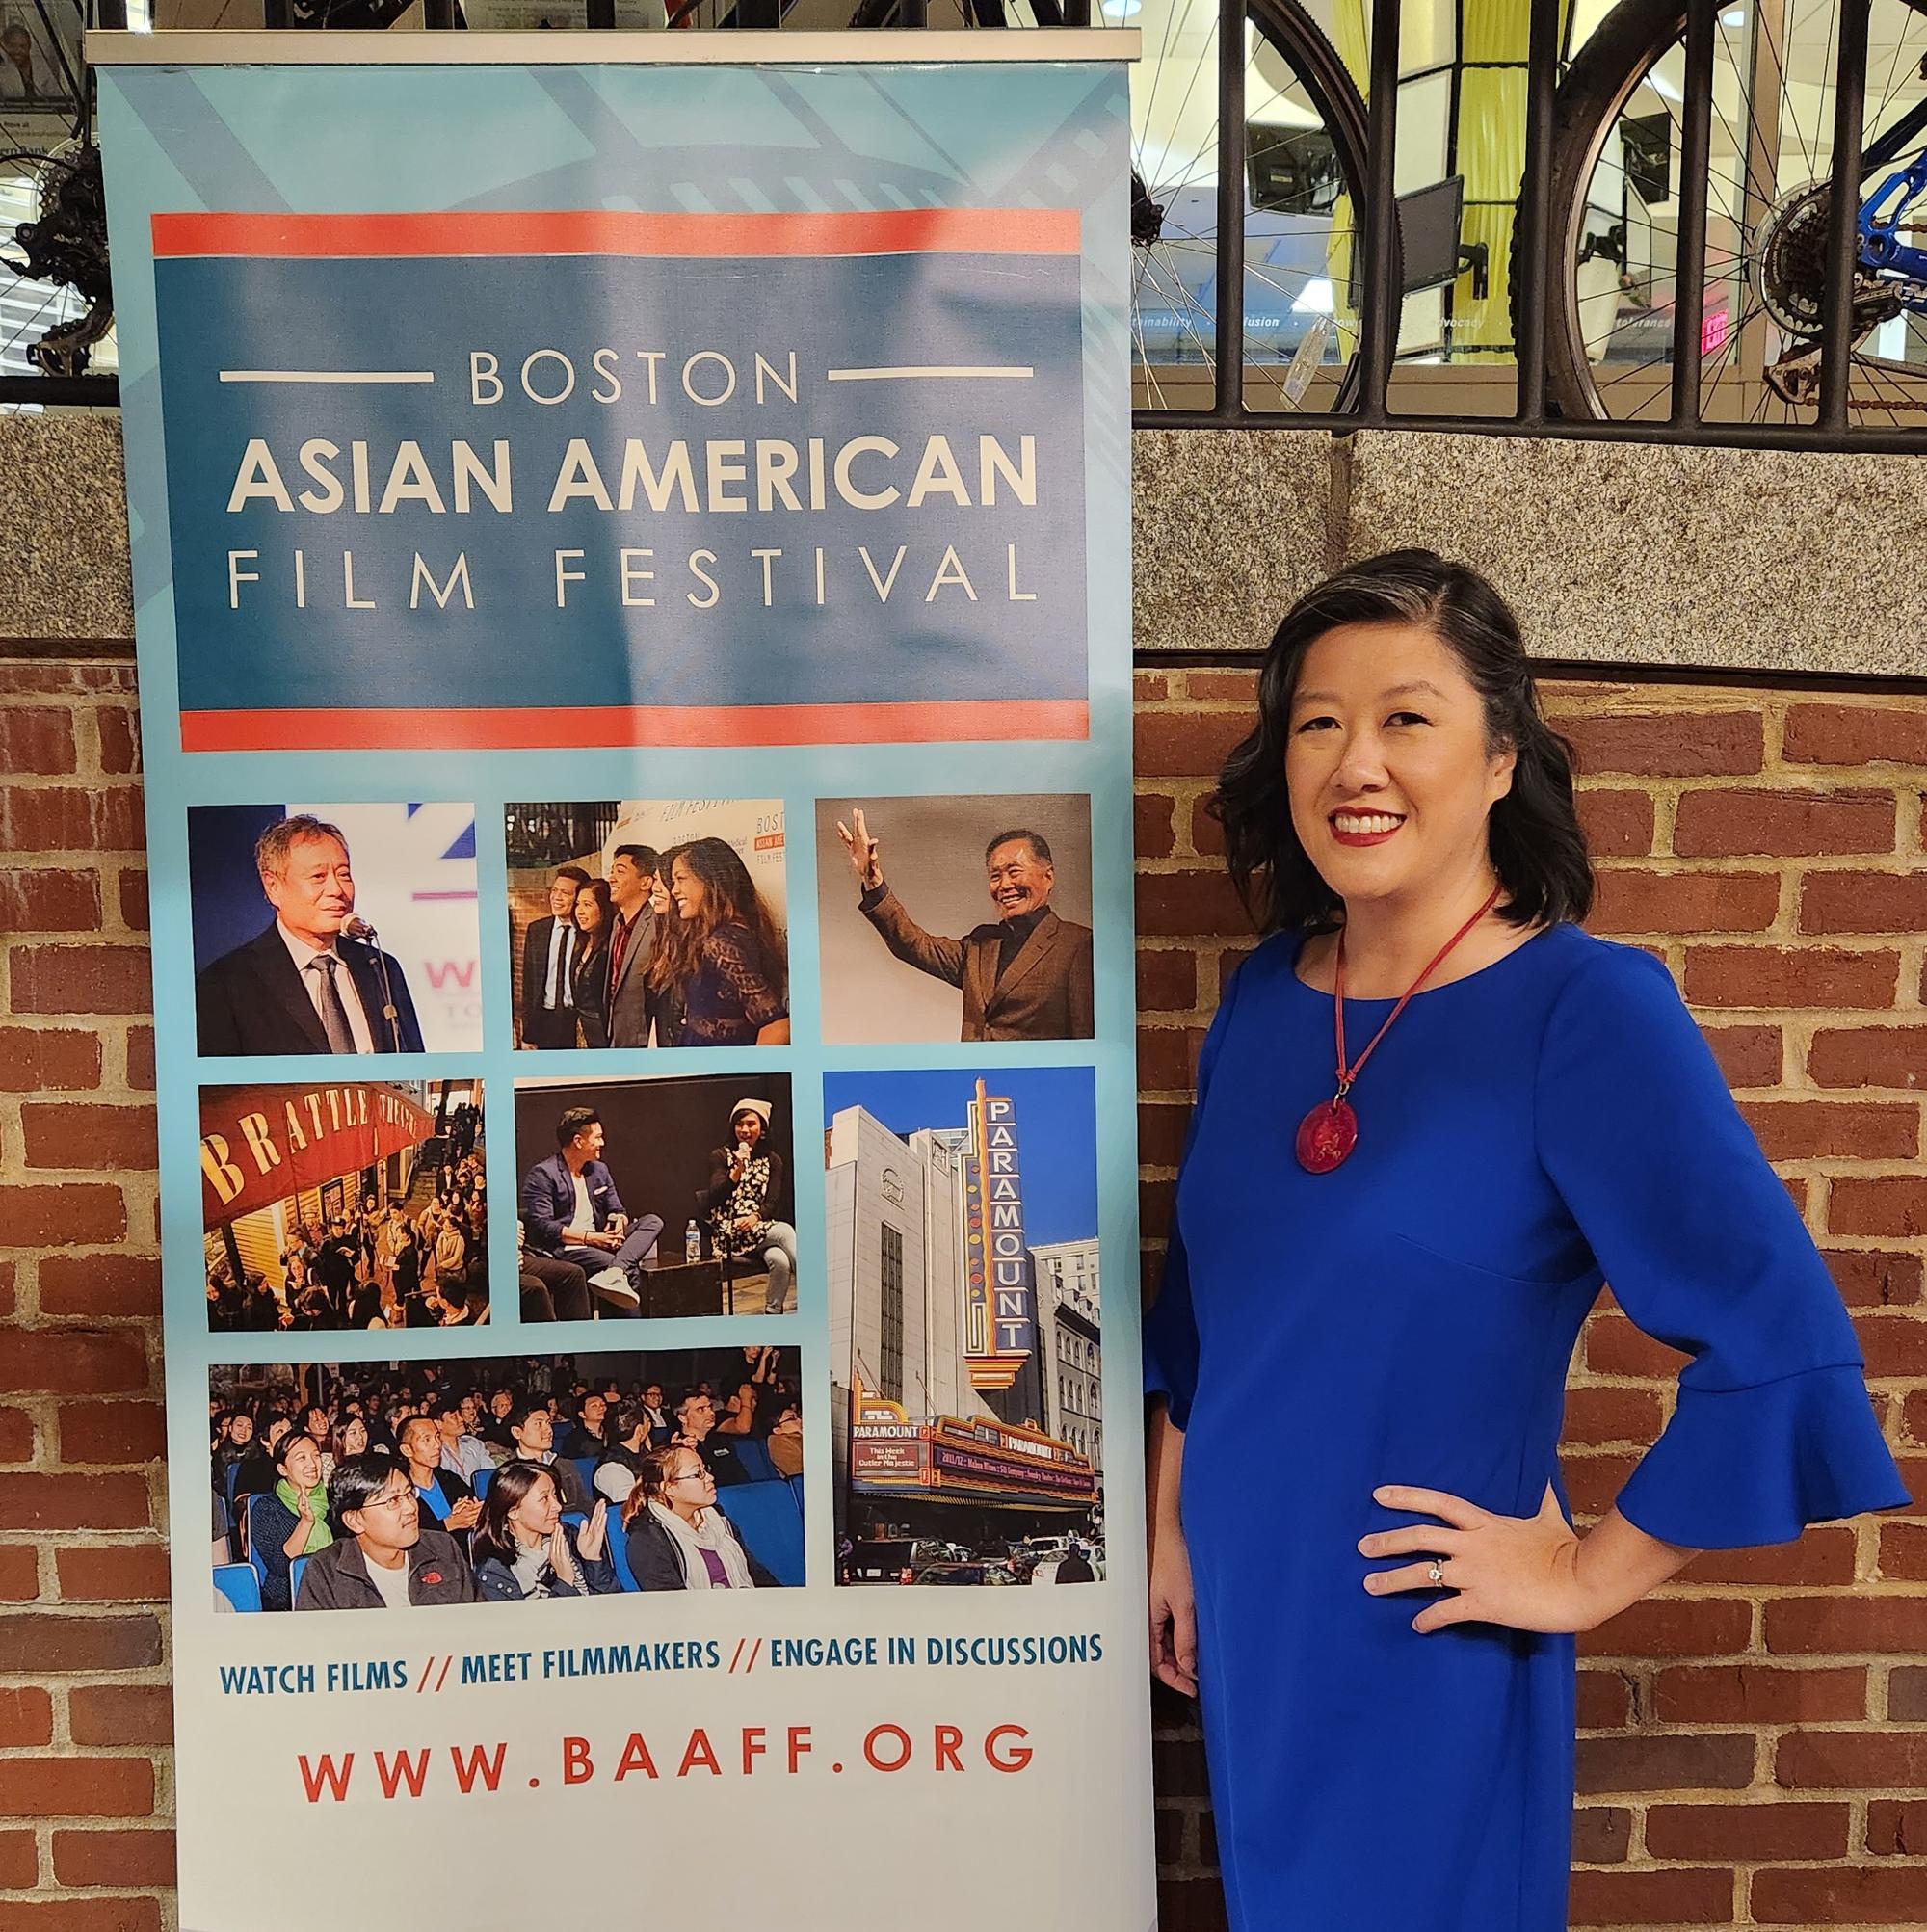 Asian woman in a blue dress standing next to a sign for the Boston Asian American Film Festival